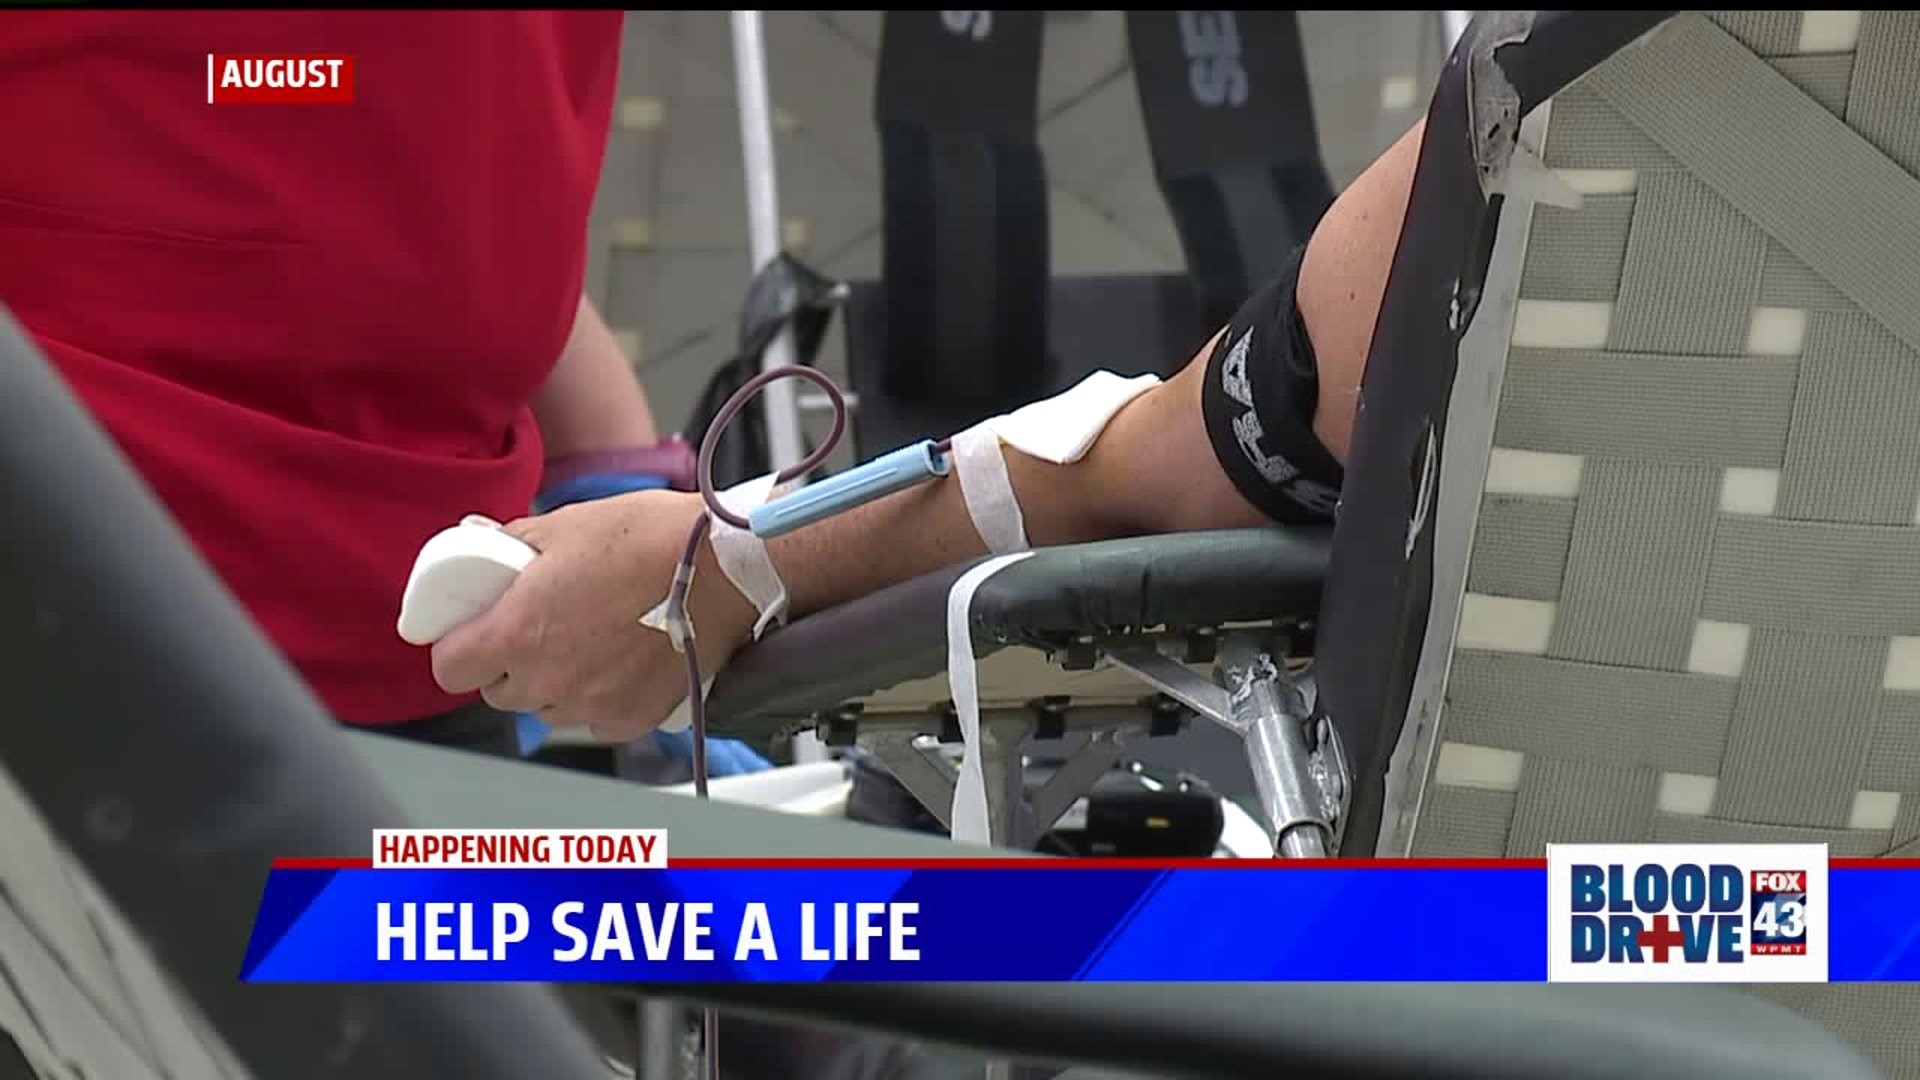 Help save lives by donating blood at the Red Cross Fox43 Blood Drive at the Jewish Community Center in York County